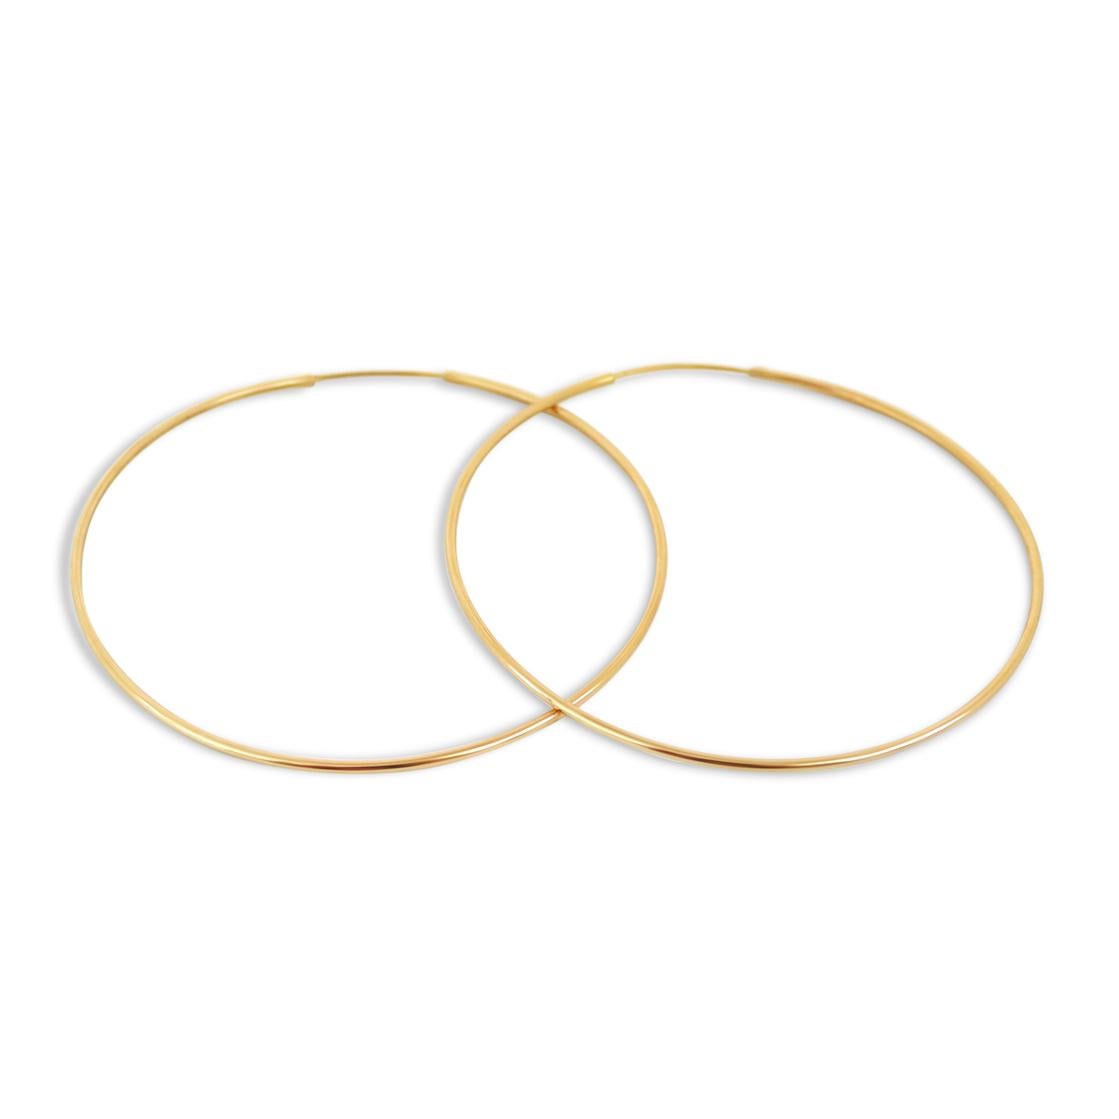 A pair of minimalist and timeless hoop earrings, both precious and sustainable.
Perfectly oversized silhouette made of recycled yellow gold. They are a dramatic and flattering style statement, and they can complement just about any outfit.
Metal: